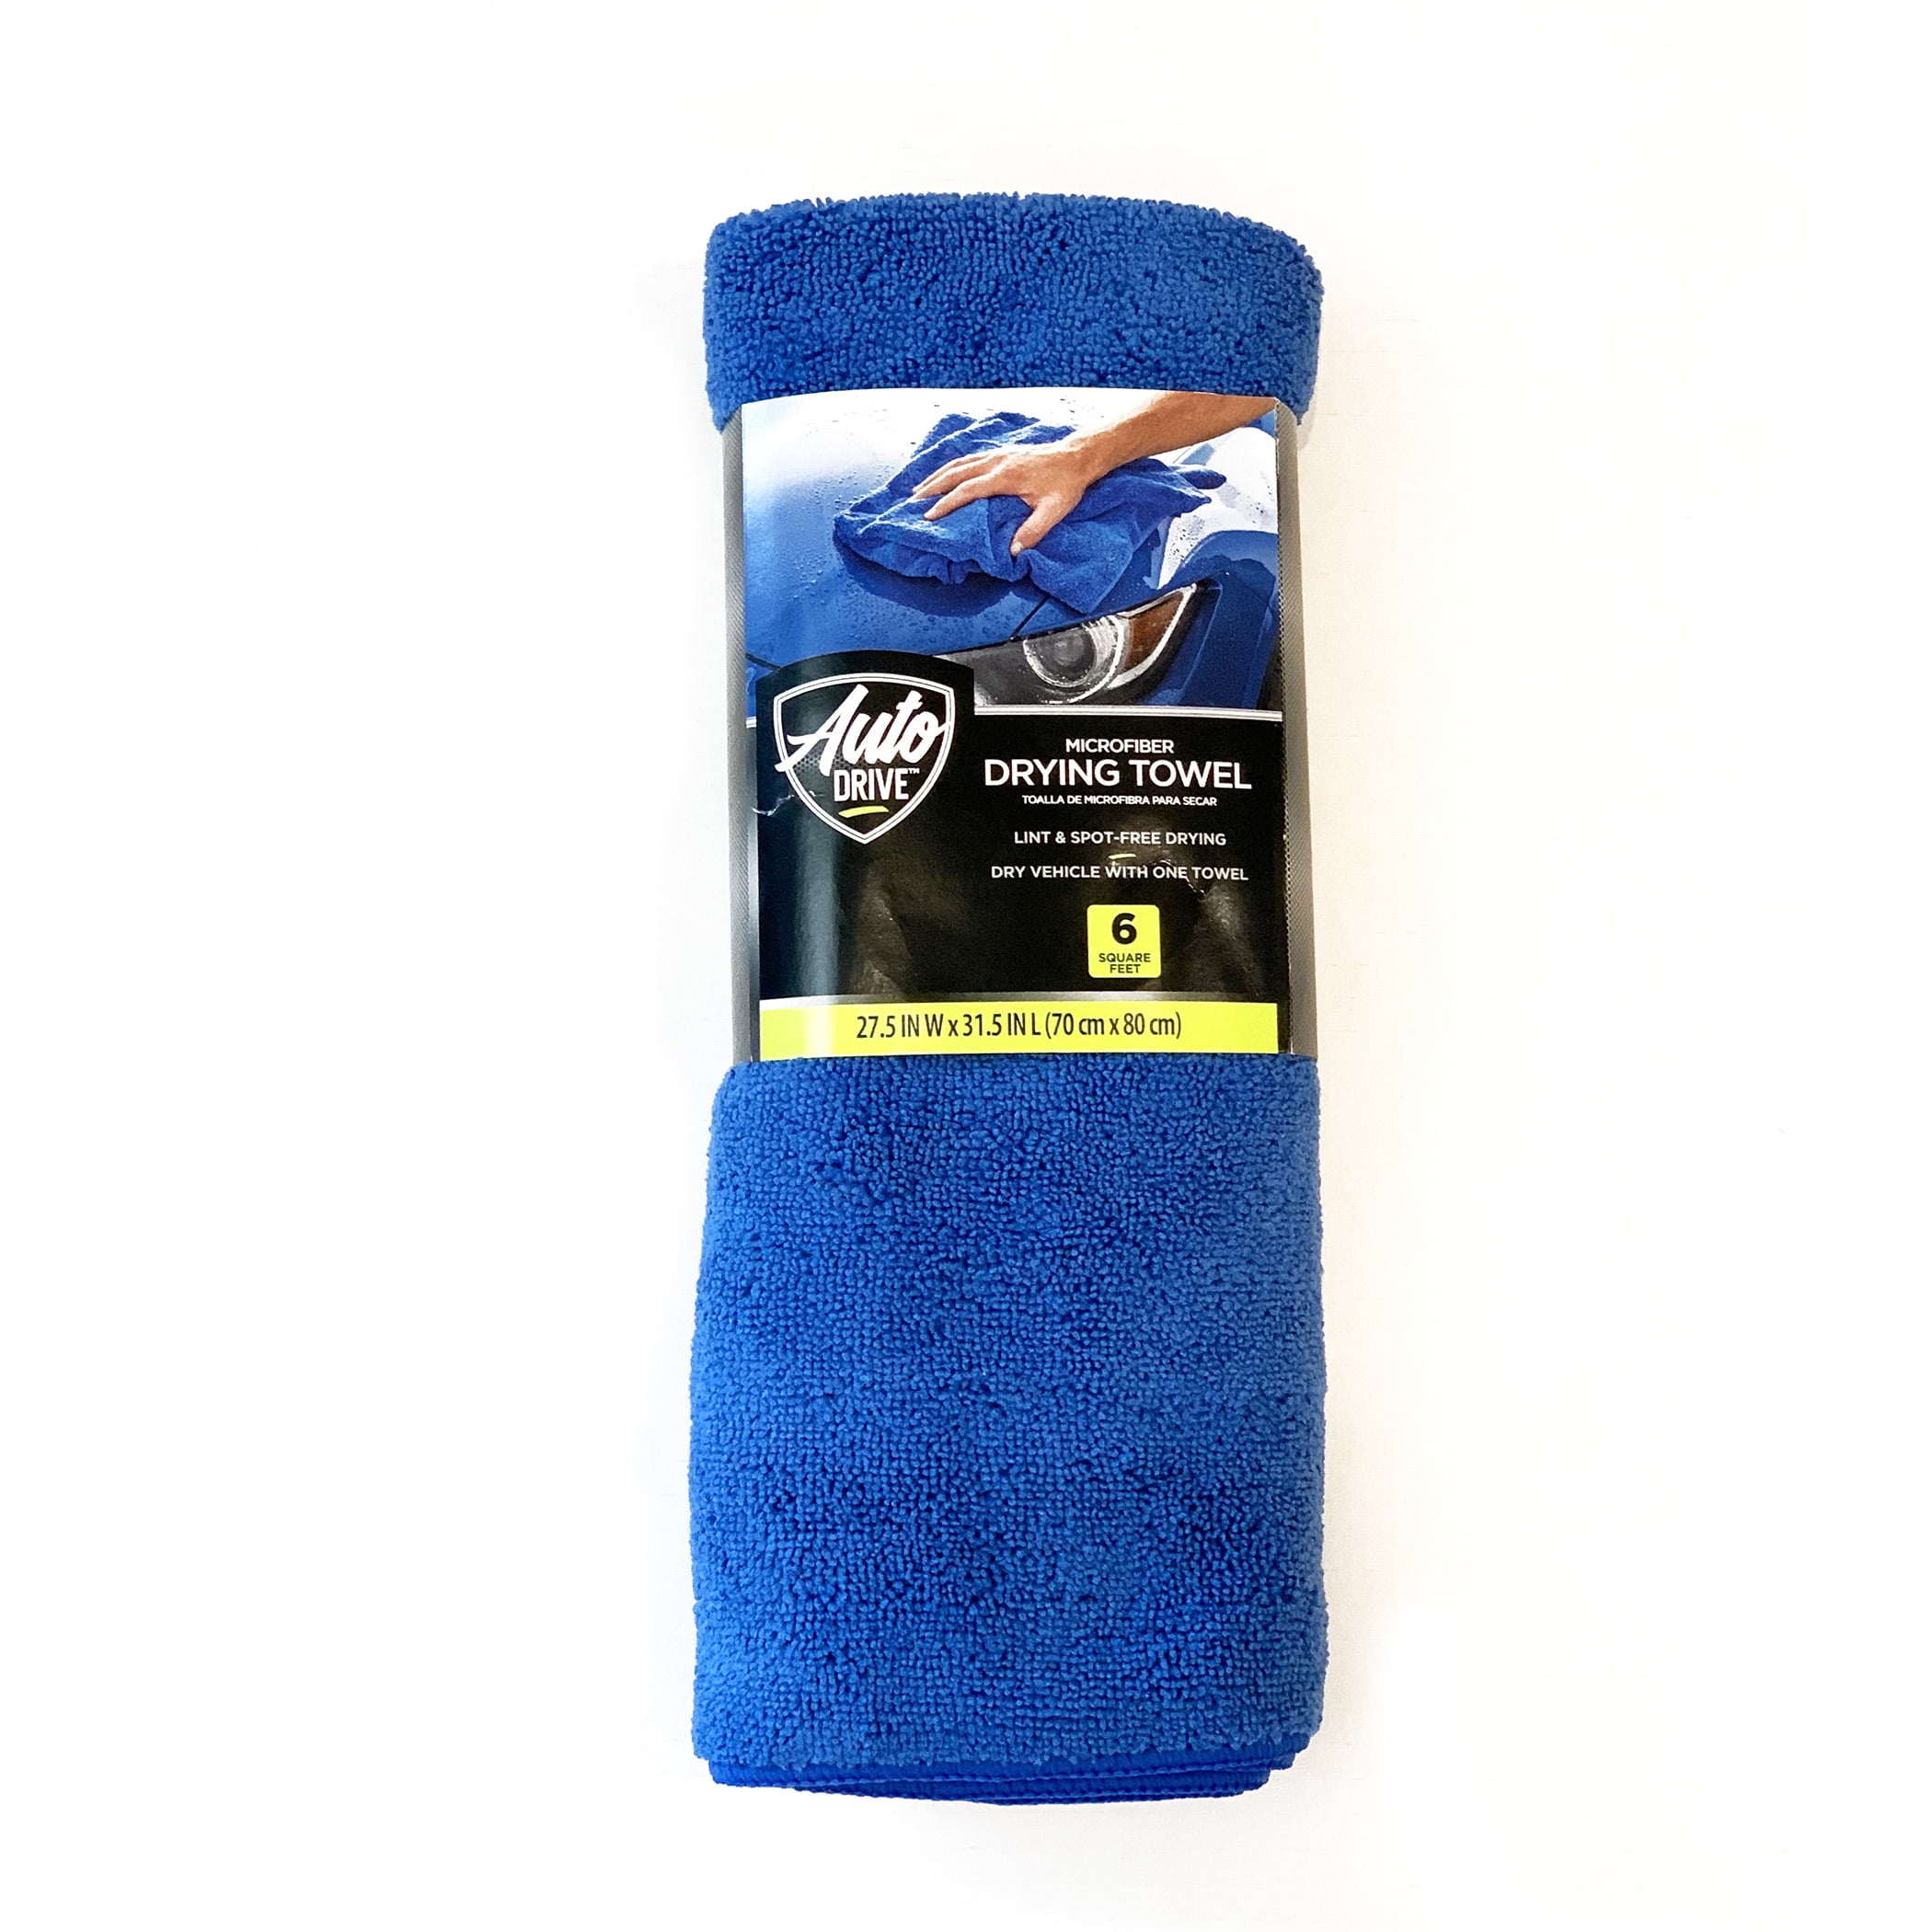 Microfiber drying towel absorbent holds more than ordinary towels Blue 2PK 